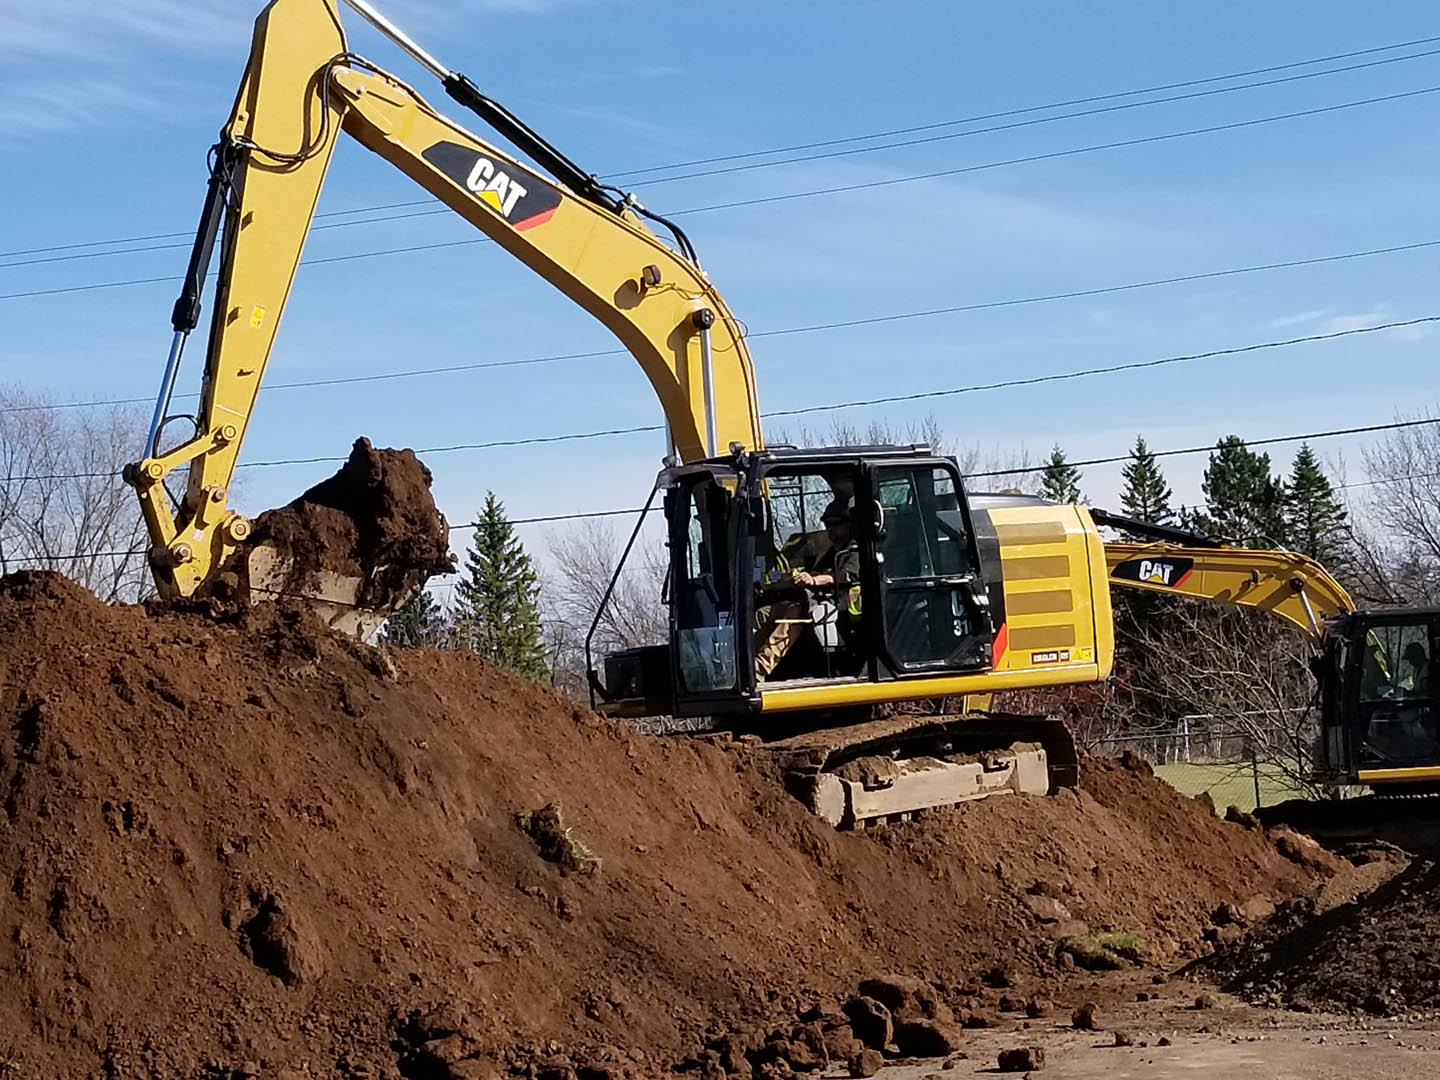 An excavator doing construction in the dirt